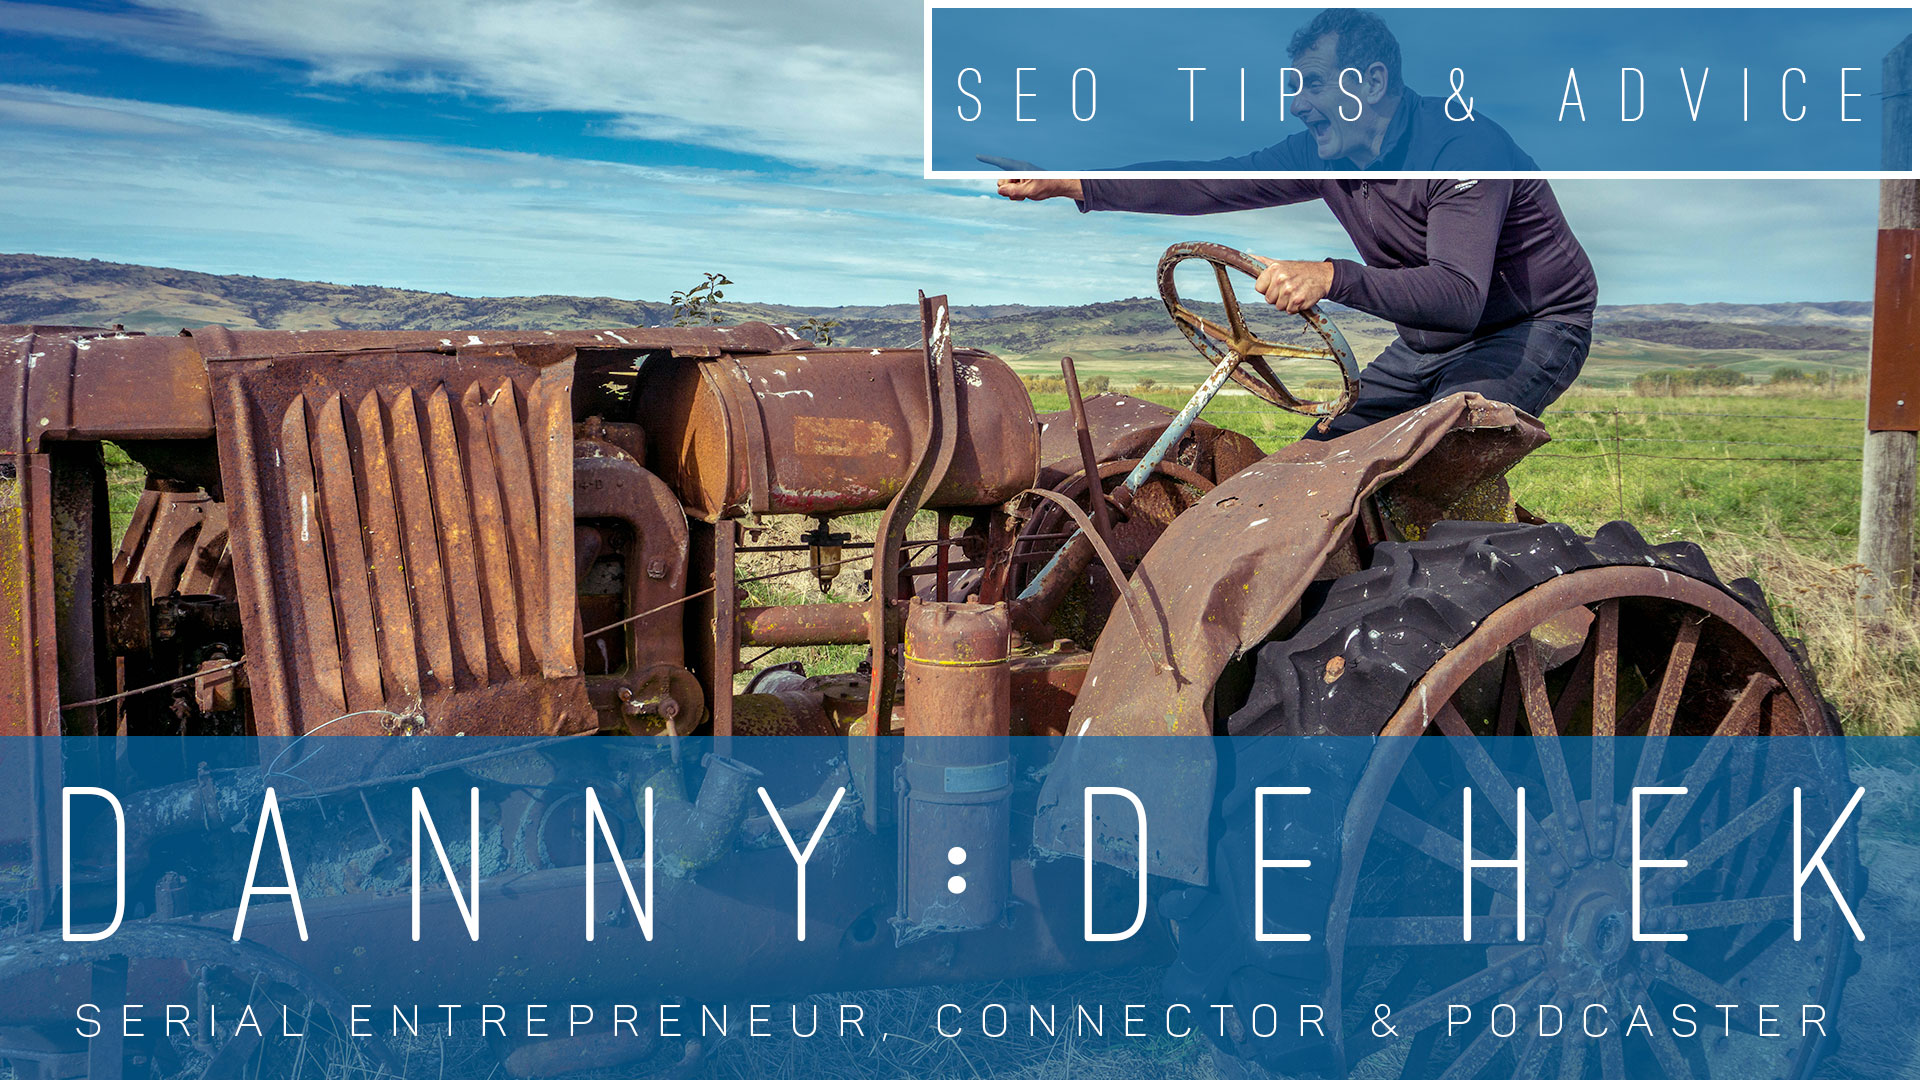 Quick FREE SEO Tips & Advice to Increase Organic Traffic by DANNY : DE HEK